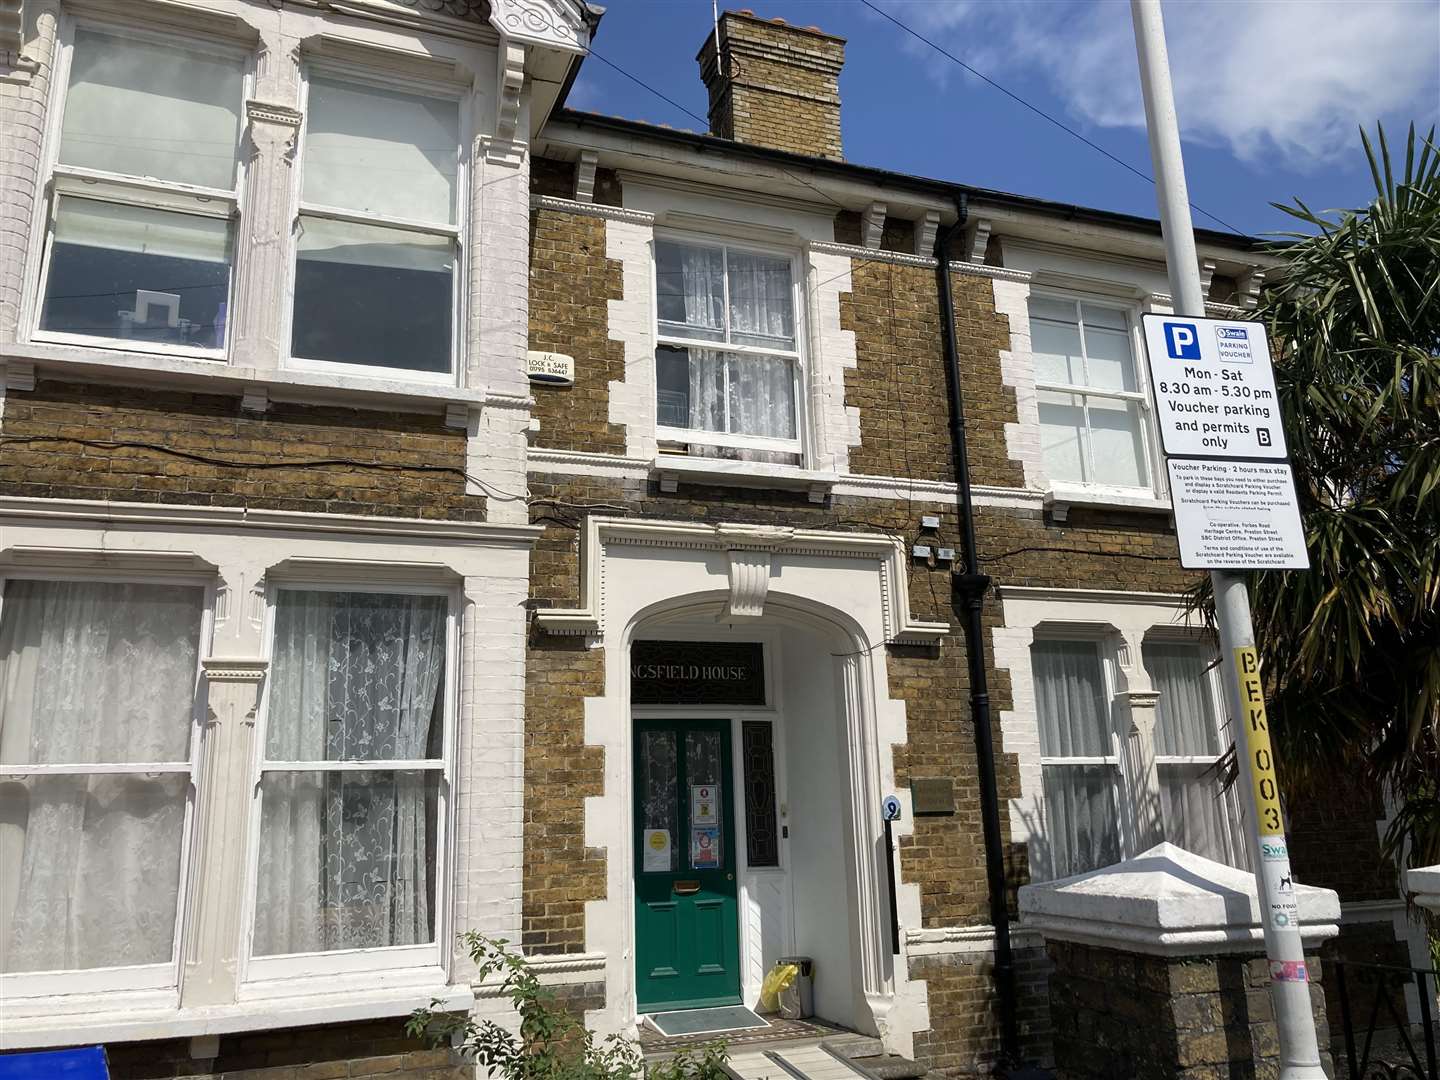 Ashurst House in Faversham has been rated inadequate by the Care Quality Commission